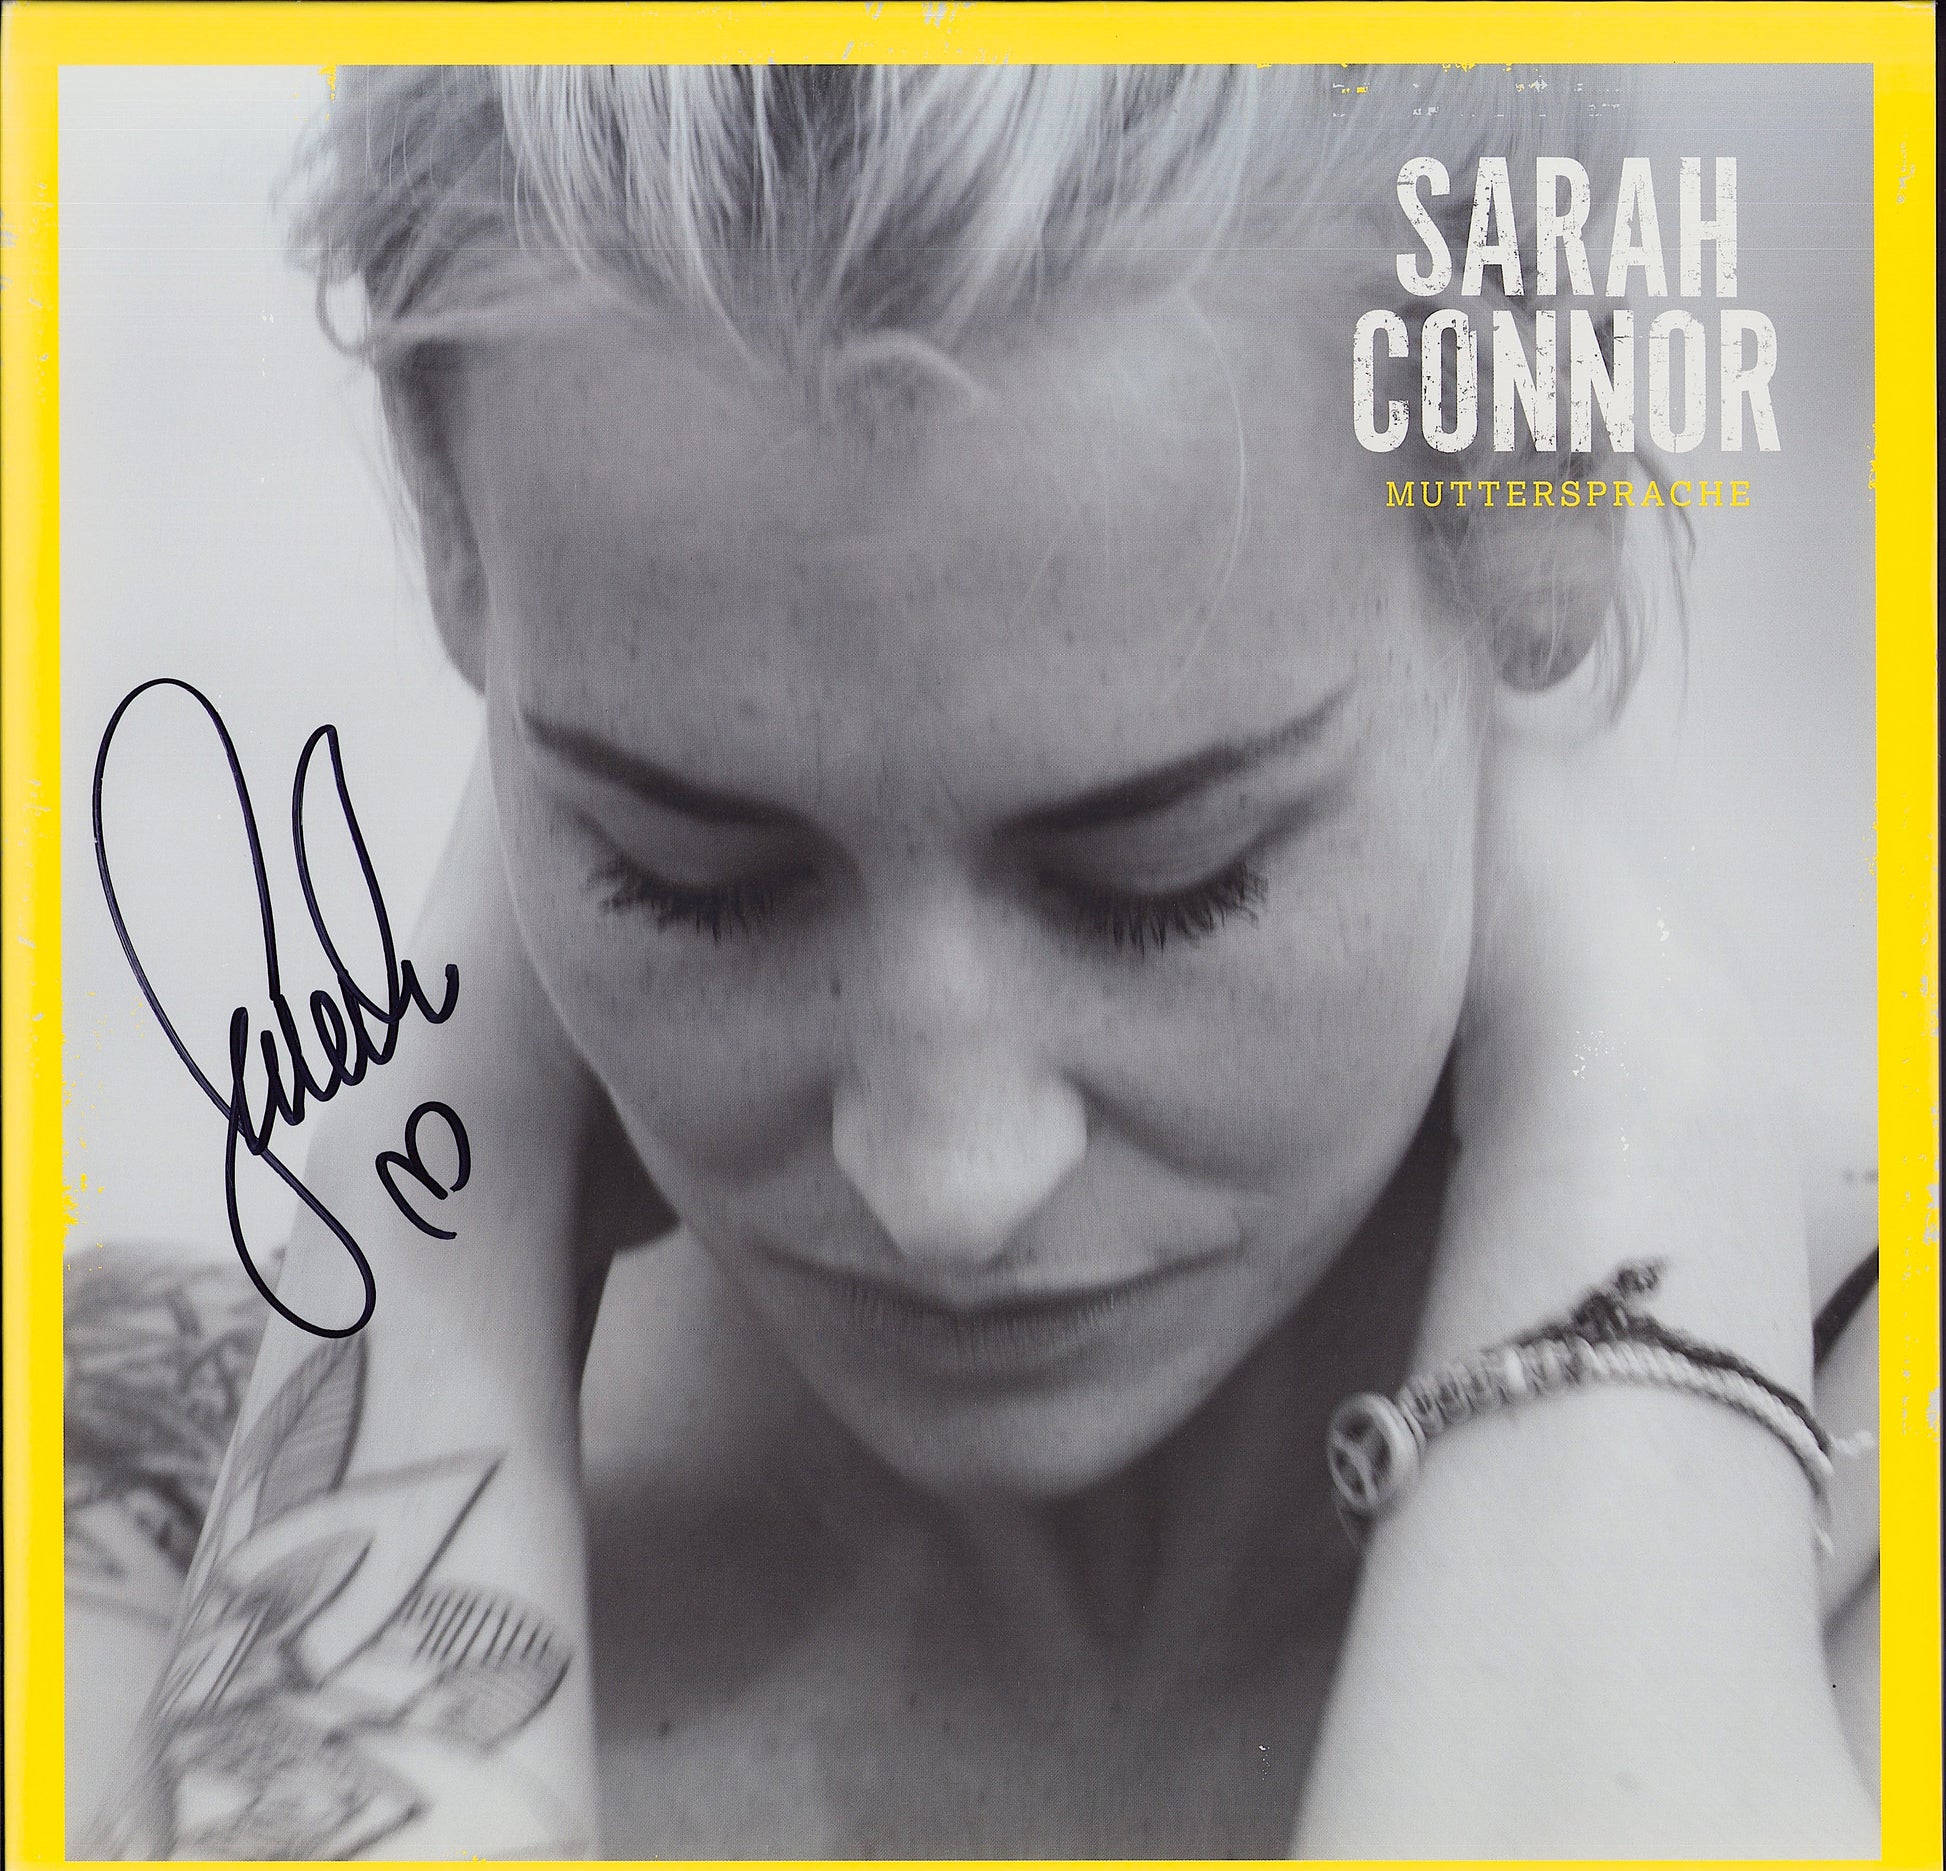 Sarah Connor - Muttersprache Vinyl 2LP Limited Edition - signed by Sarah Connor